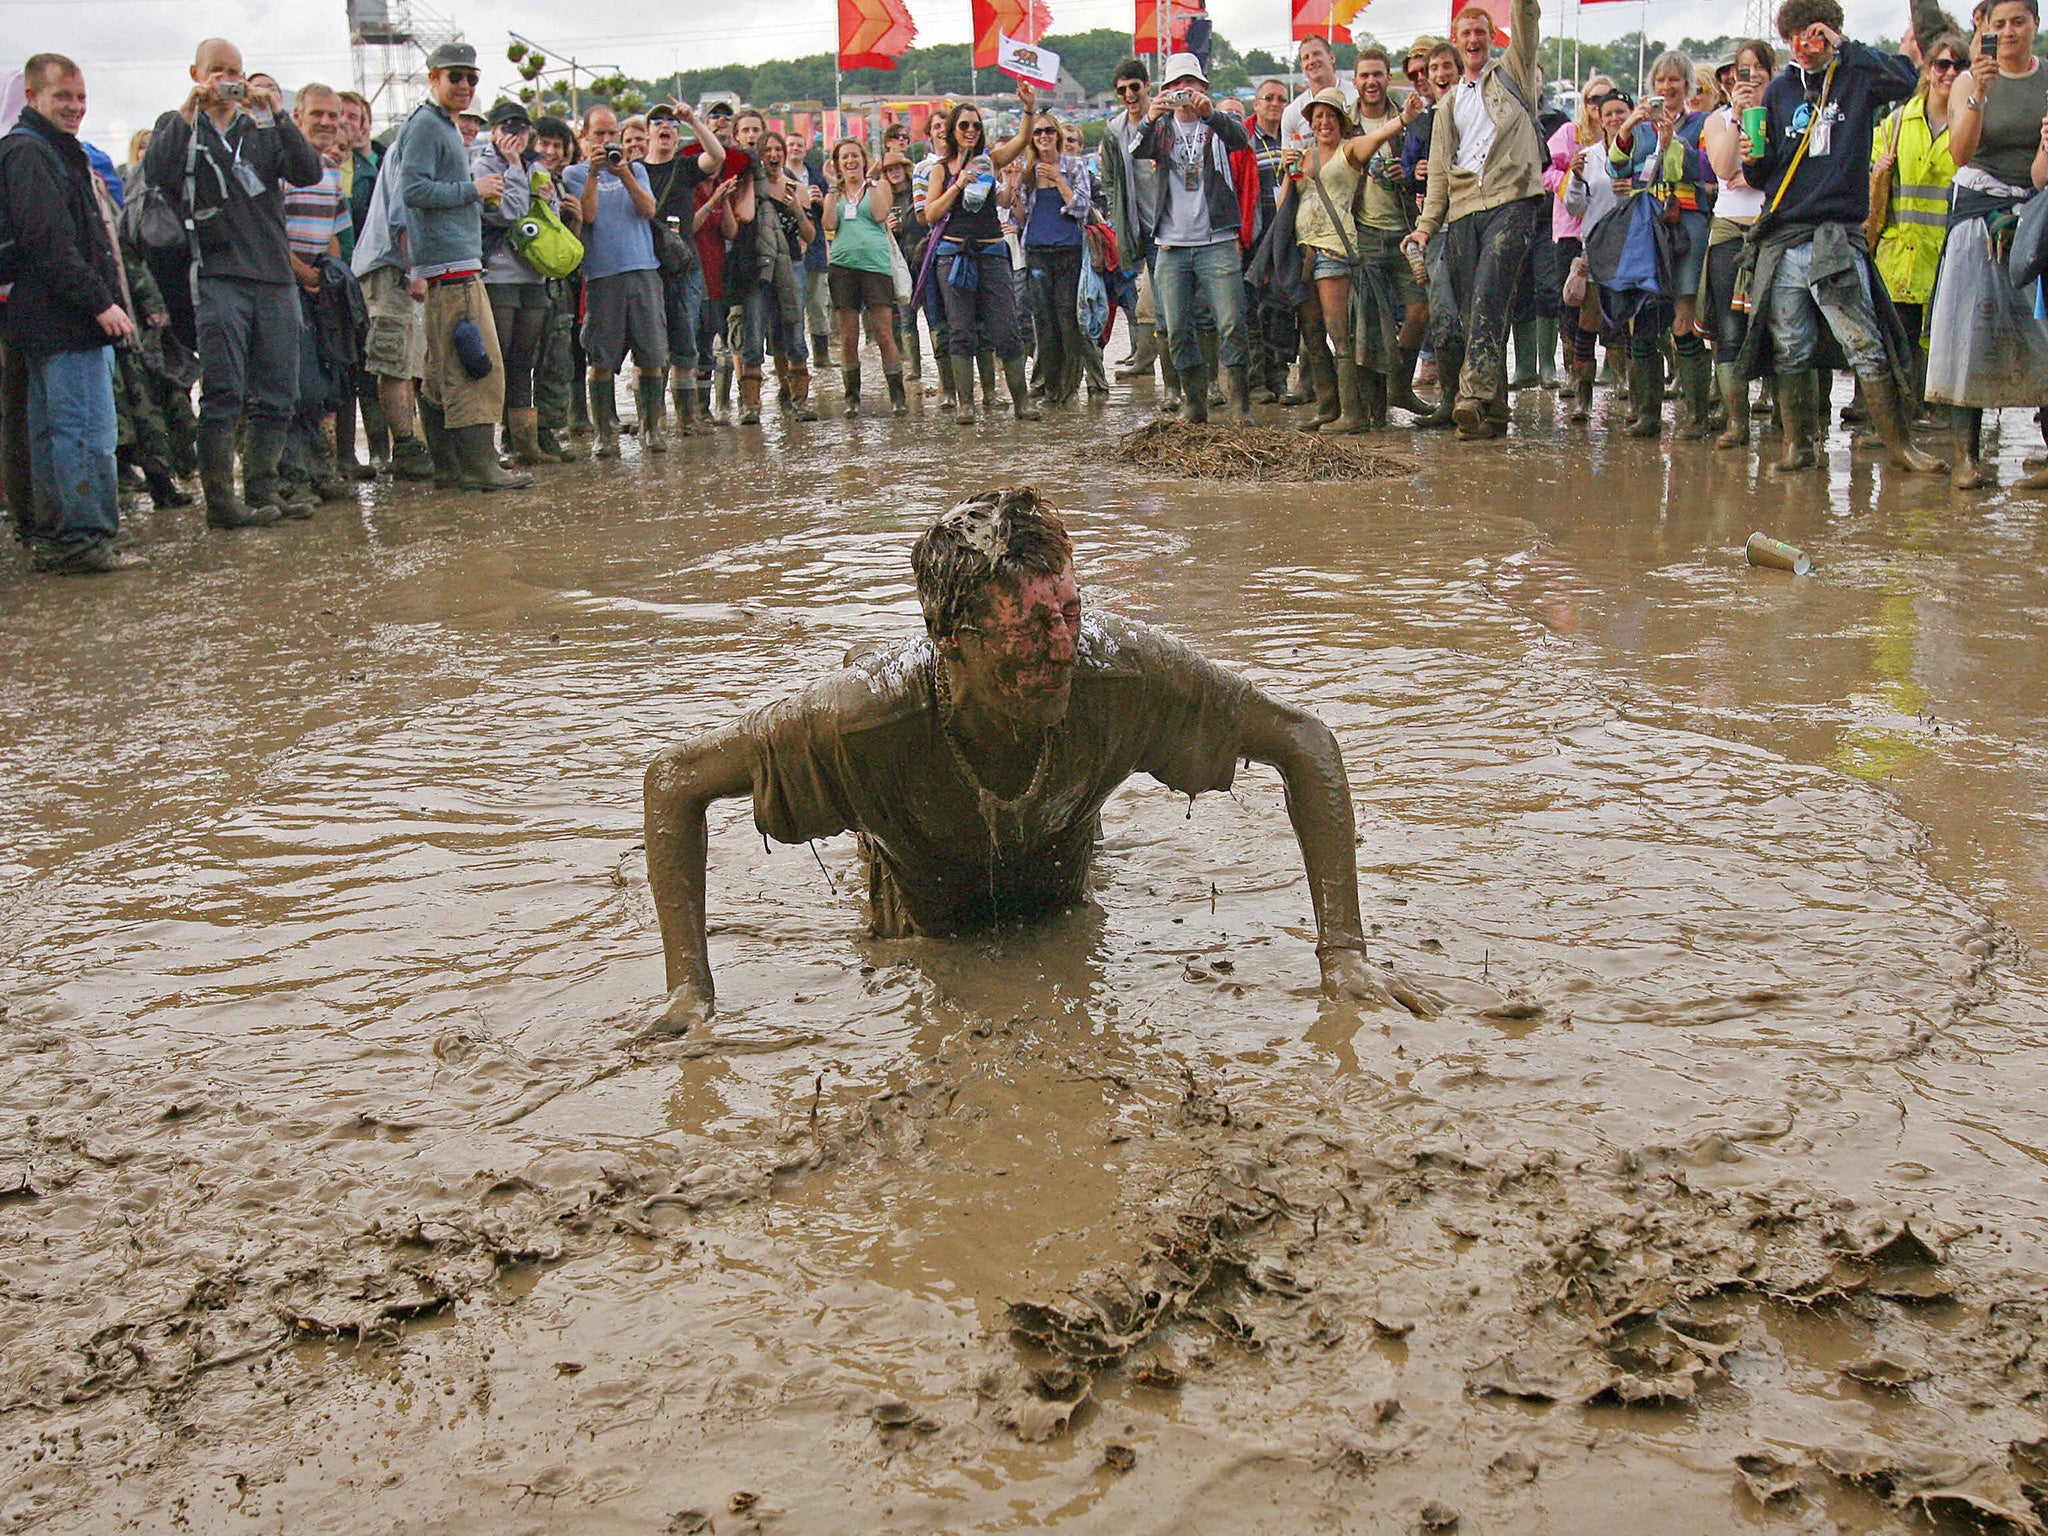 Rain and mud are predicted almost every year at Glastonbury Festival